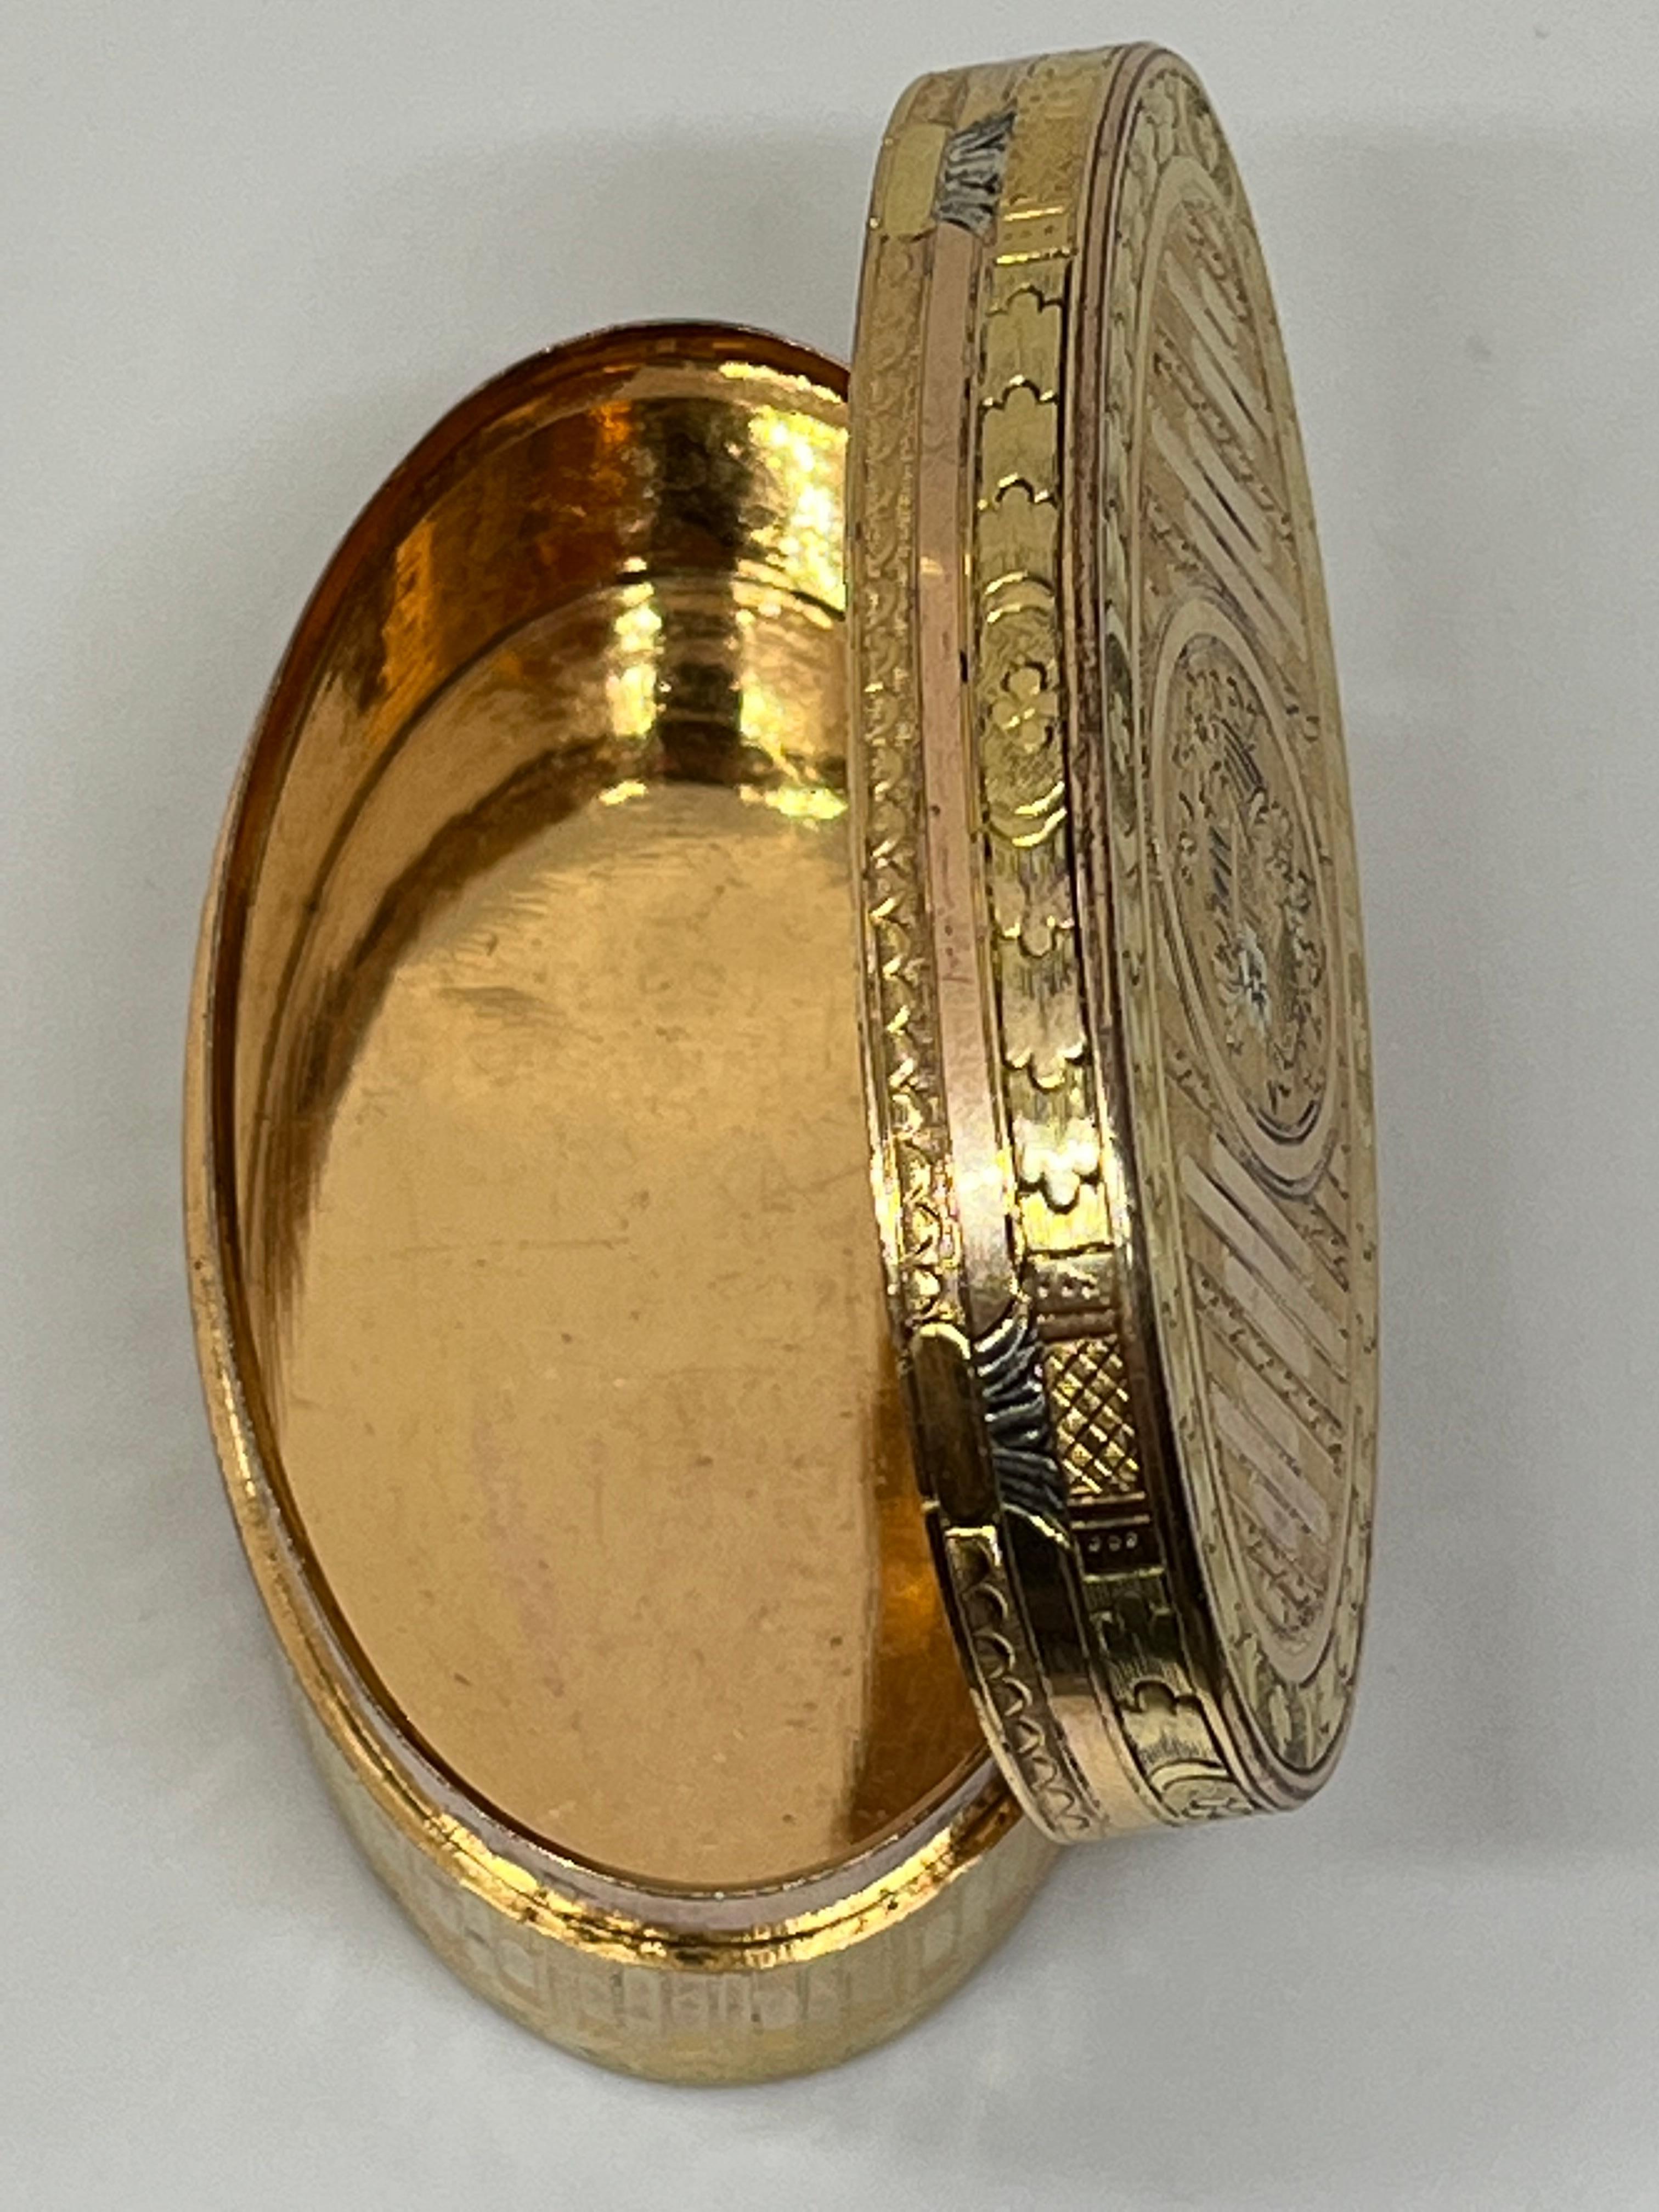 French Eighteenth-Century Silver-Gilt Snuff Box, of Outstanding Quality 3